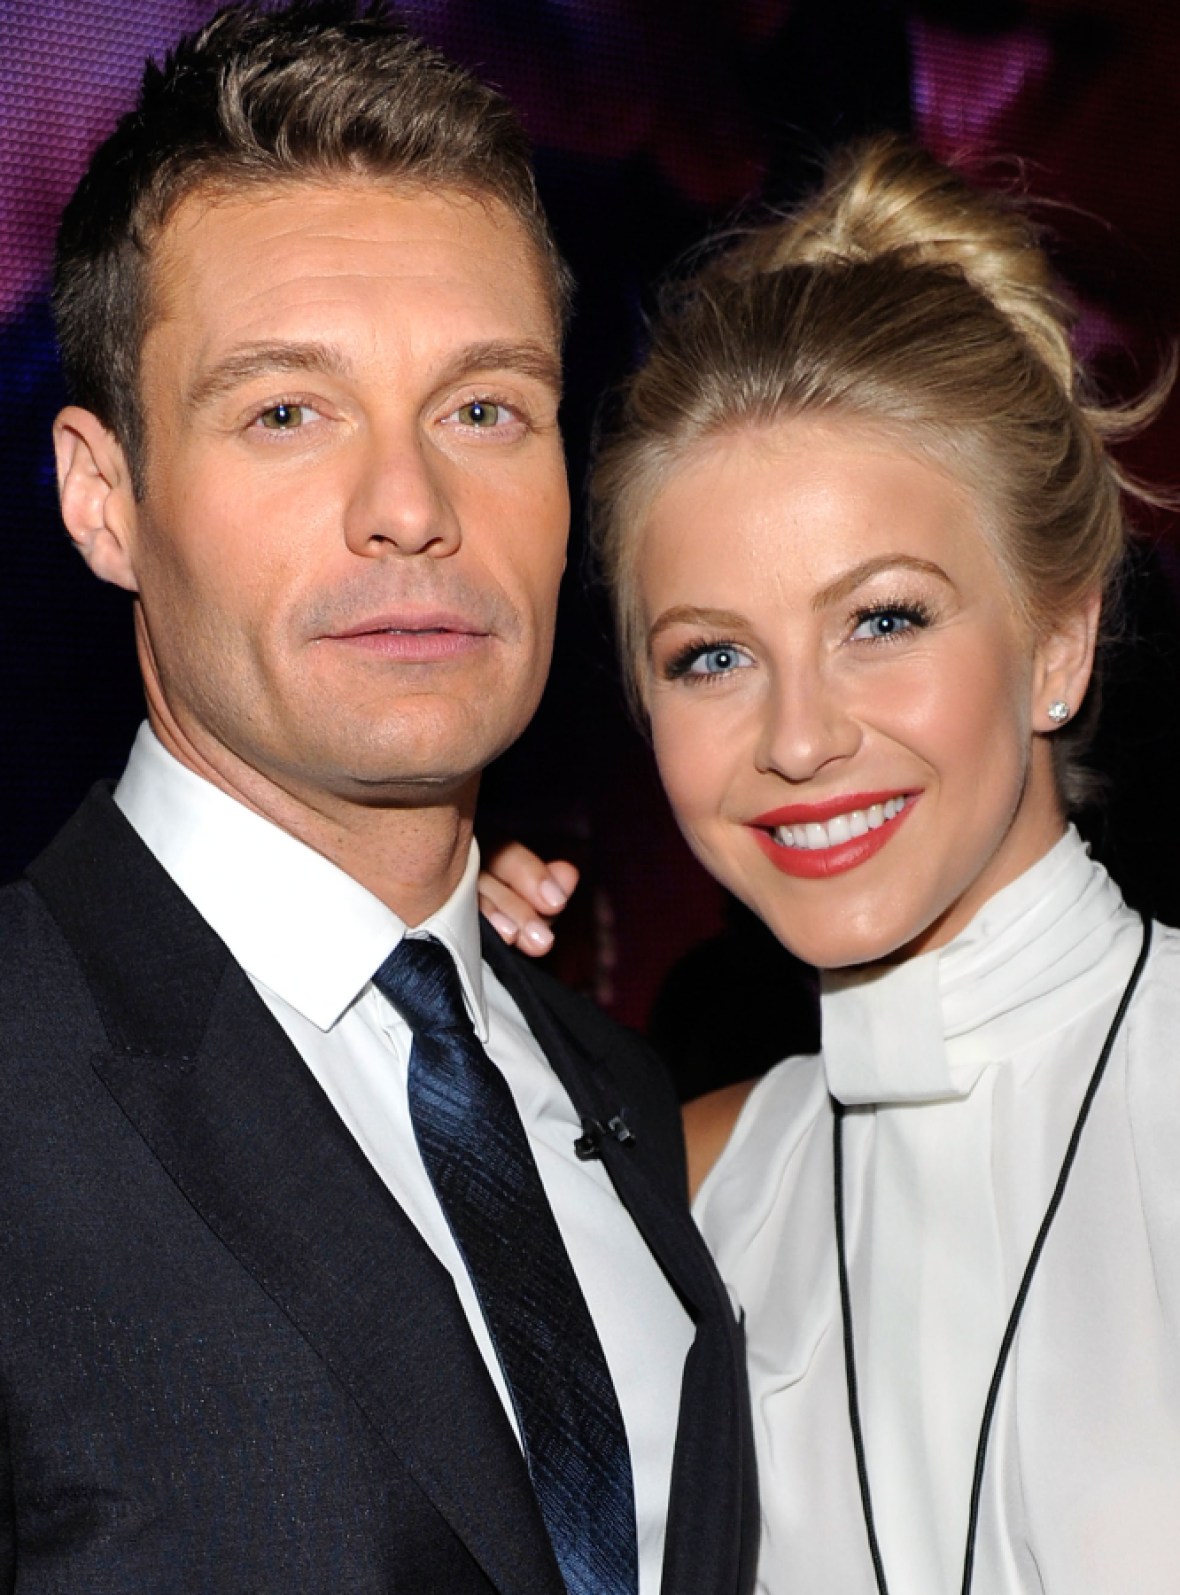 Ryan Seacrest And Julianne Hough S Relationship — Go Inside Their Past